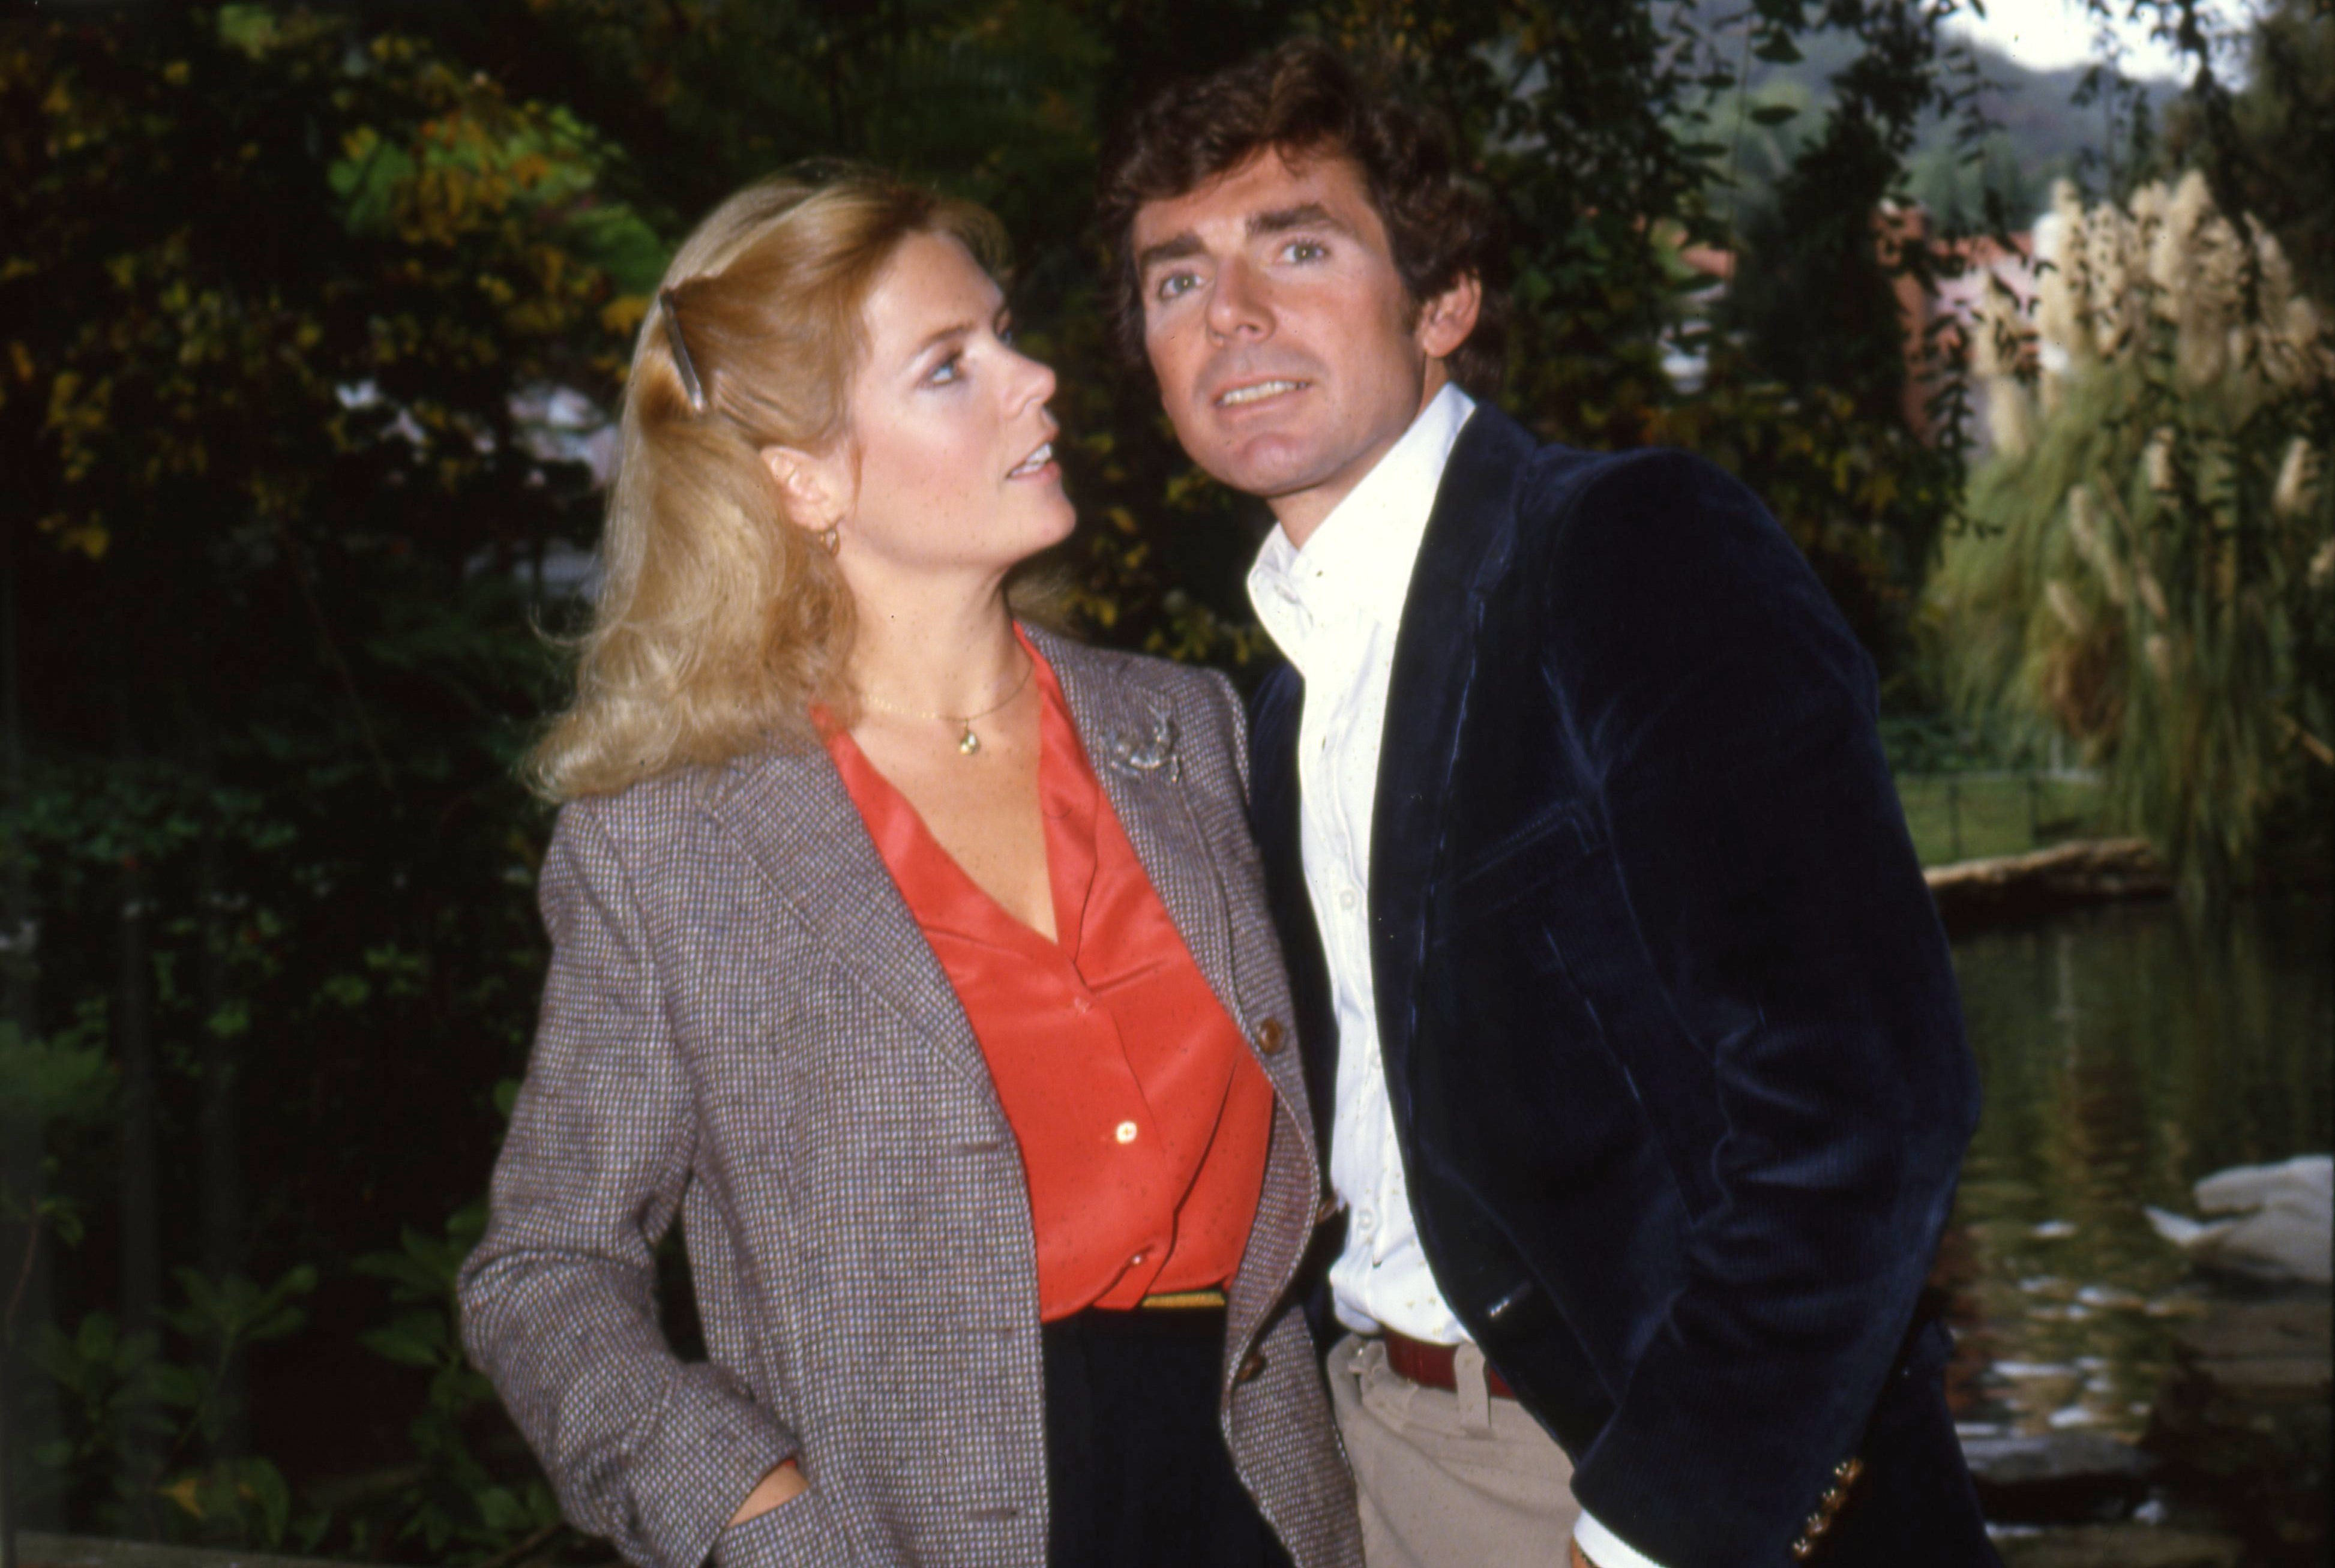 Meredith Baxter-Birney and her husband David Birney pose for a portrait session at home in circa 1982, in Los Angeles, California | Photo: Maureen Donaldson/Michael Ochs Archives/Getty Images